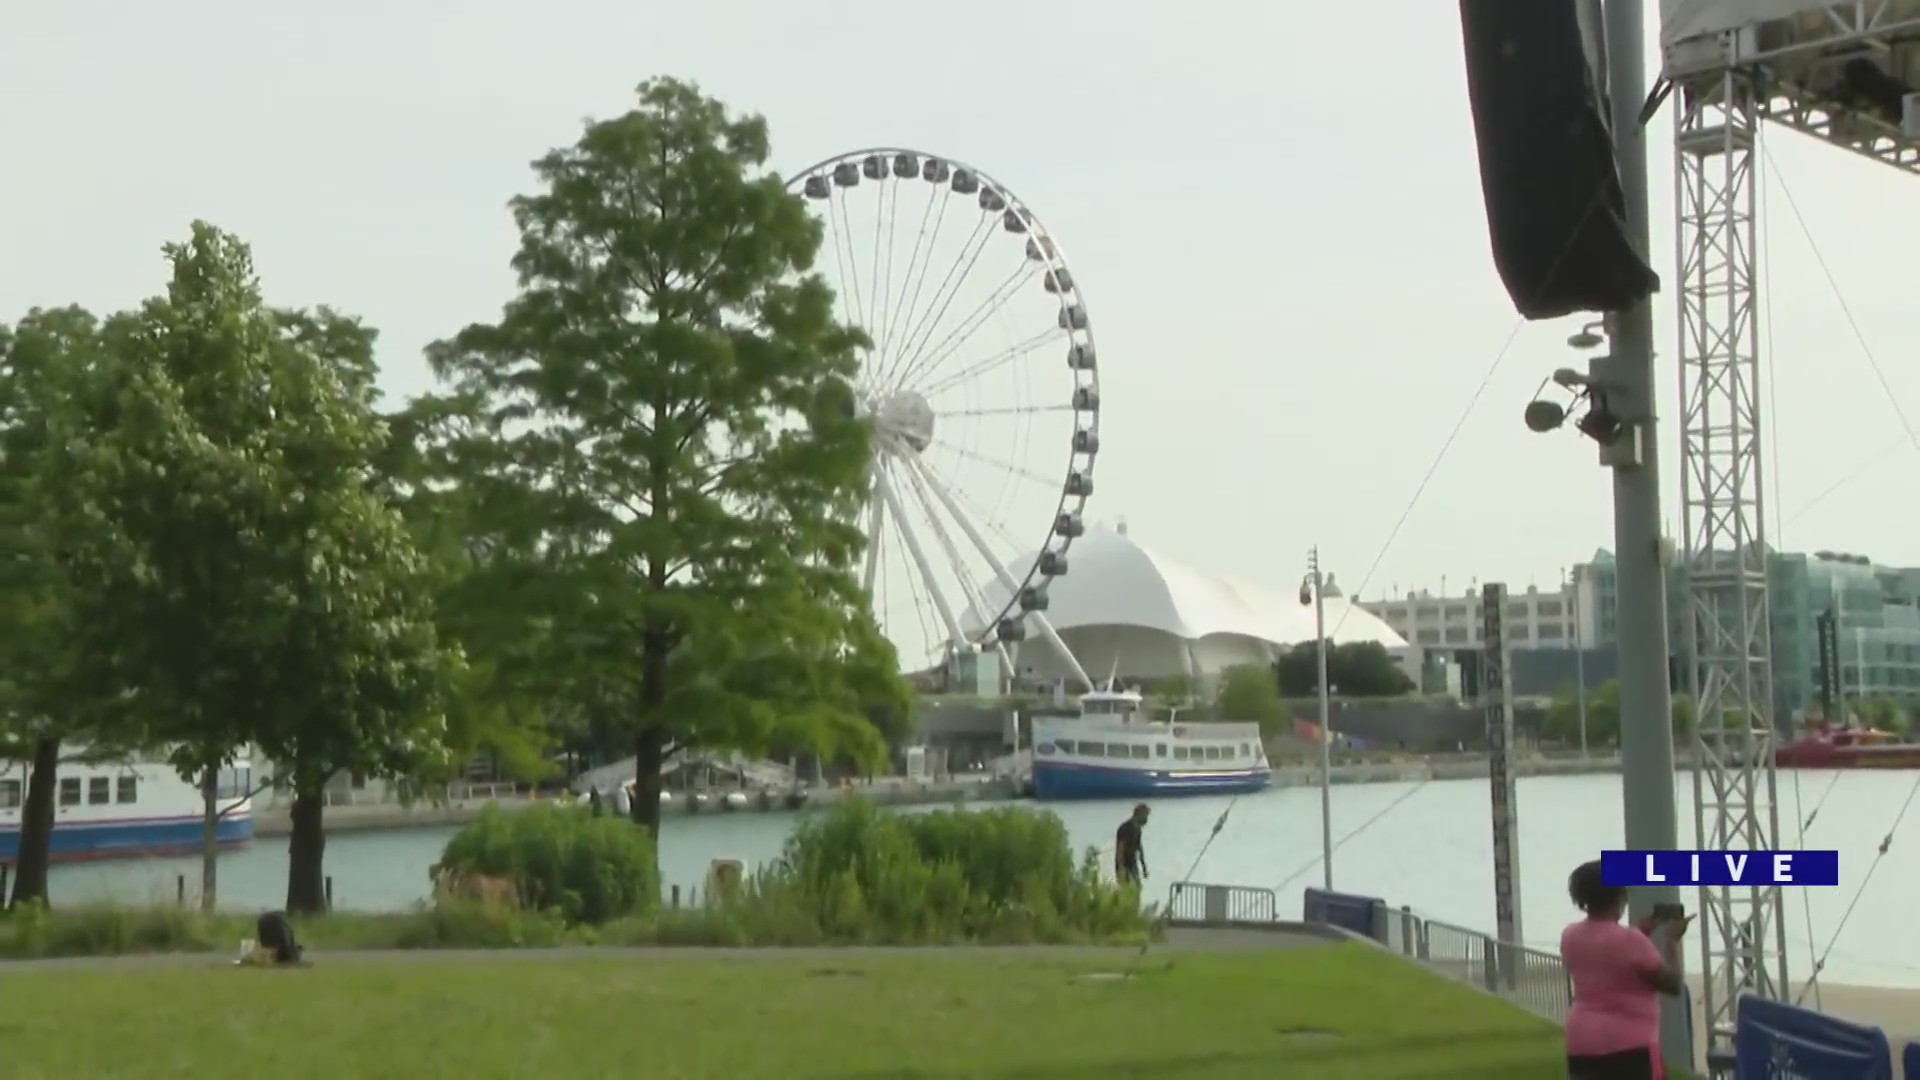 Around Town checks in with Navy Pier  about their new safety measures